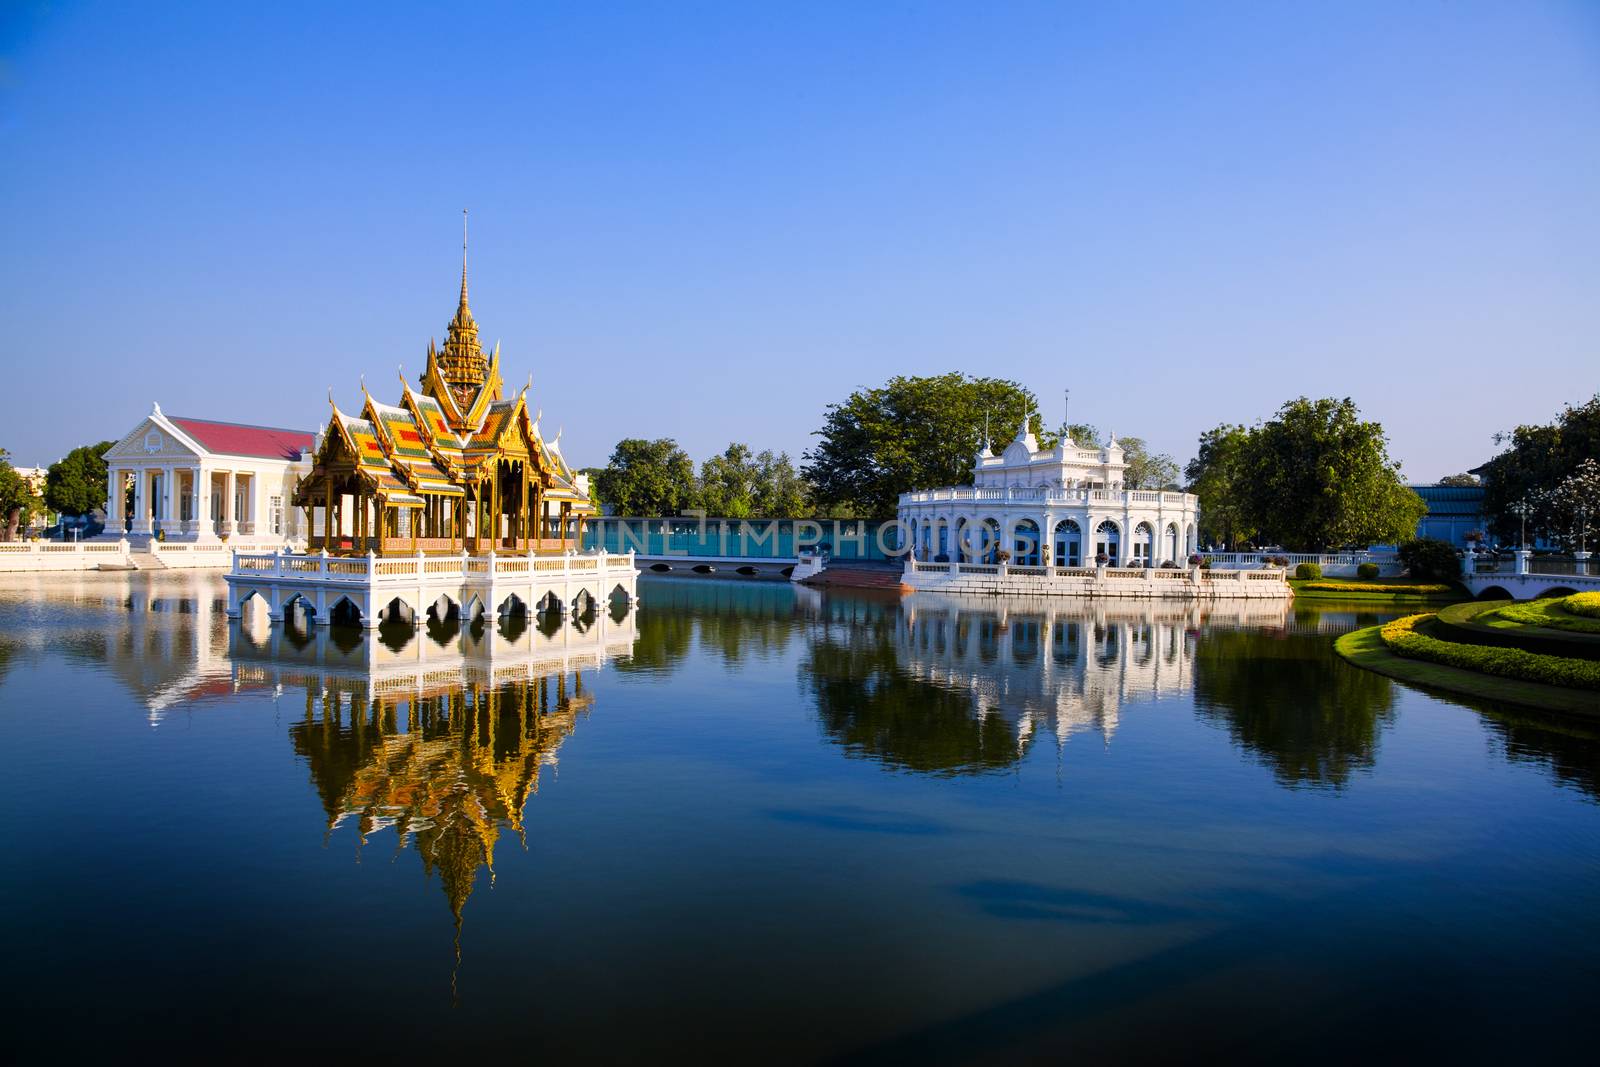 Bang Pa-In Royal Palace known as the Summer Palace. Located in Bang Pa-In district Ayutthaya Province THAILAND